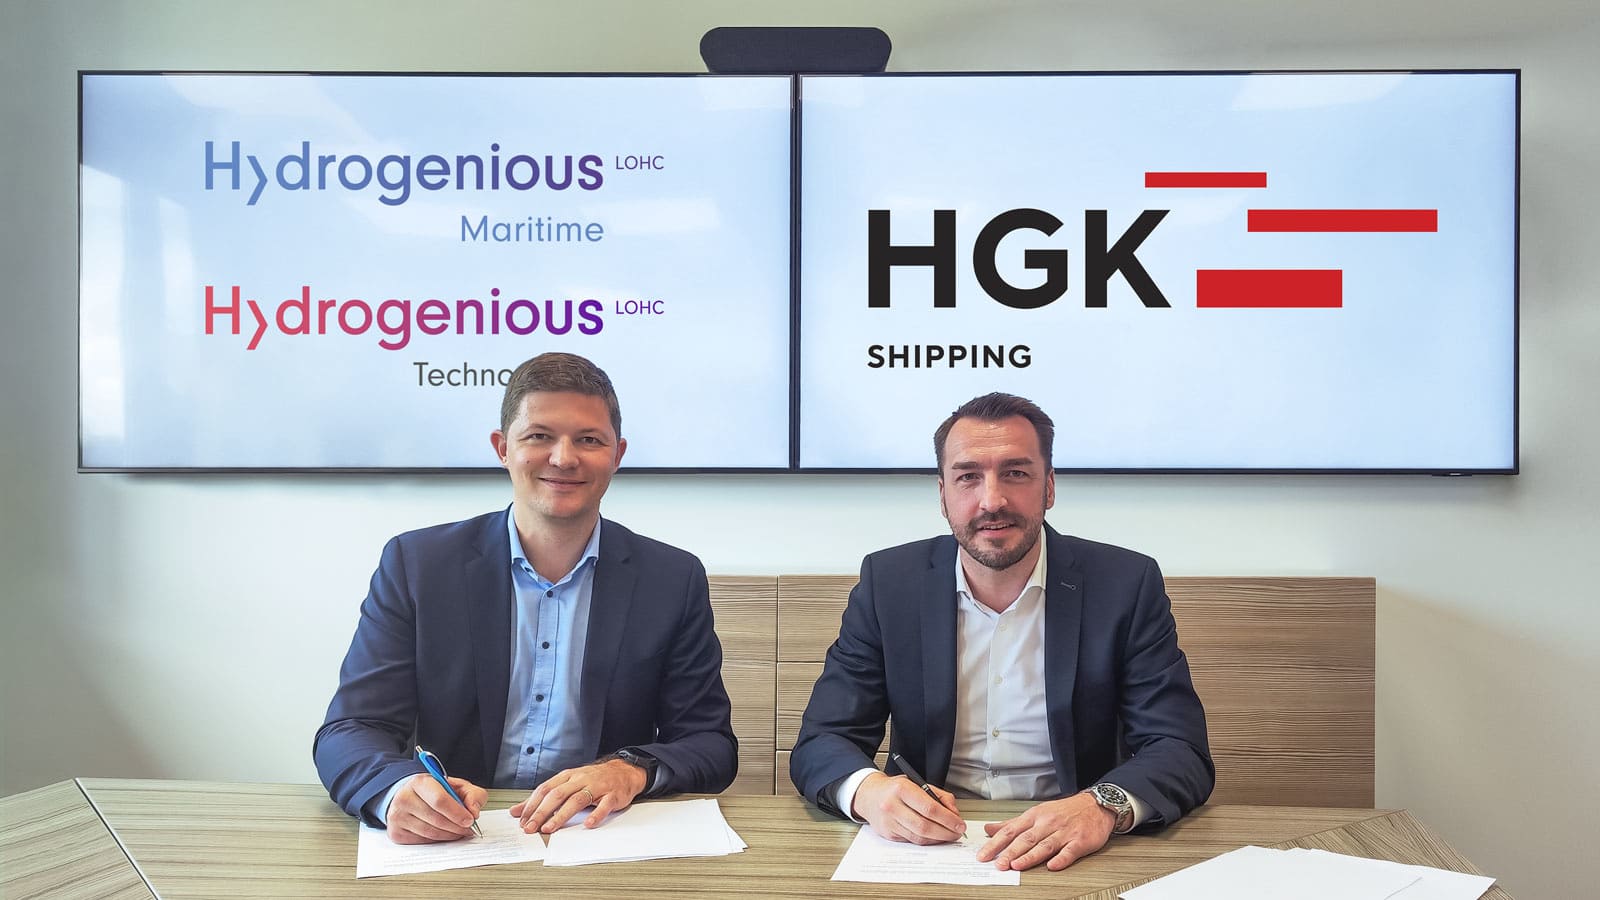 HGK_Shipping_Hydrogenious